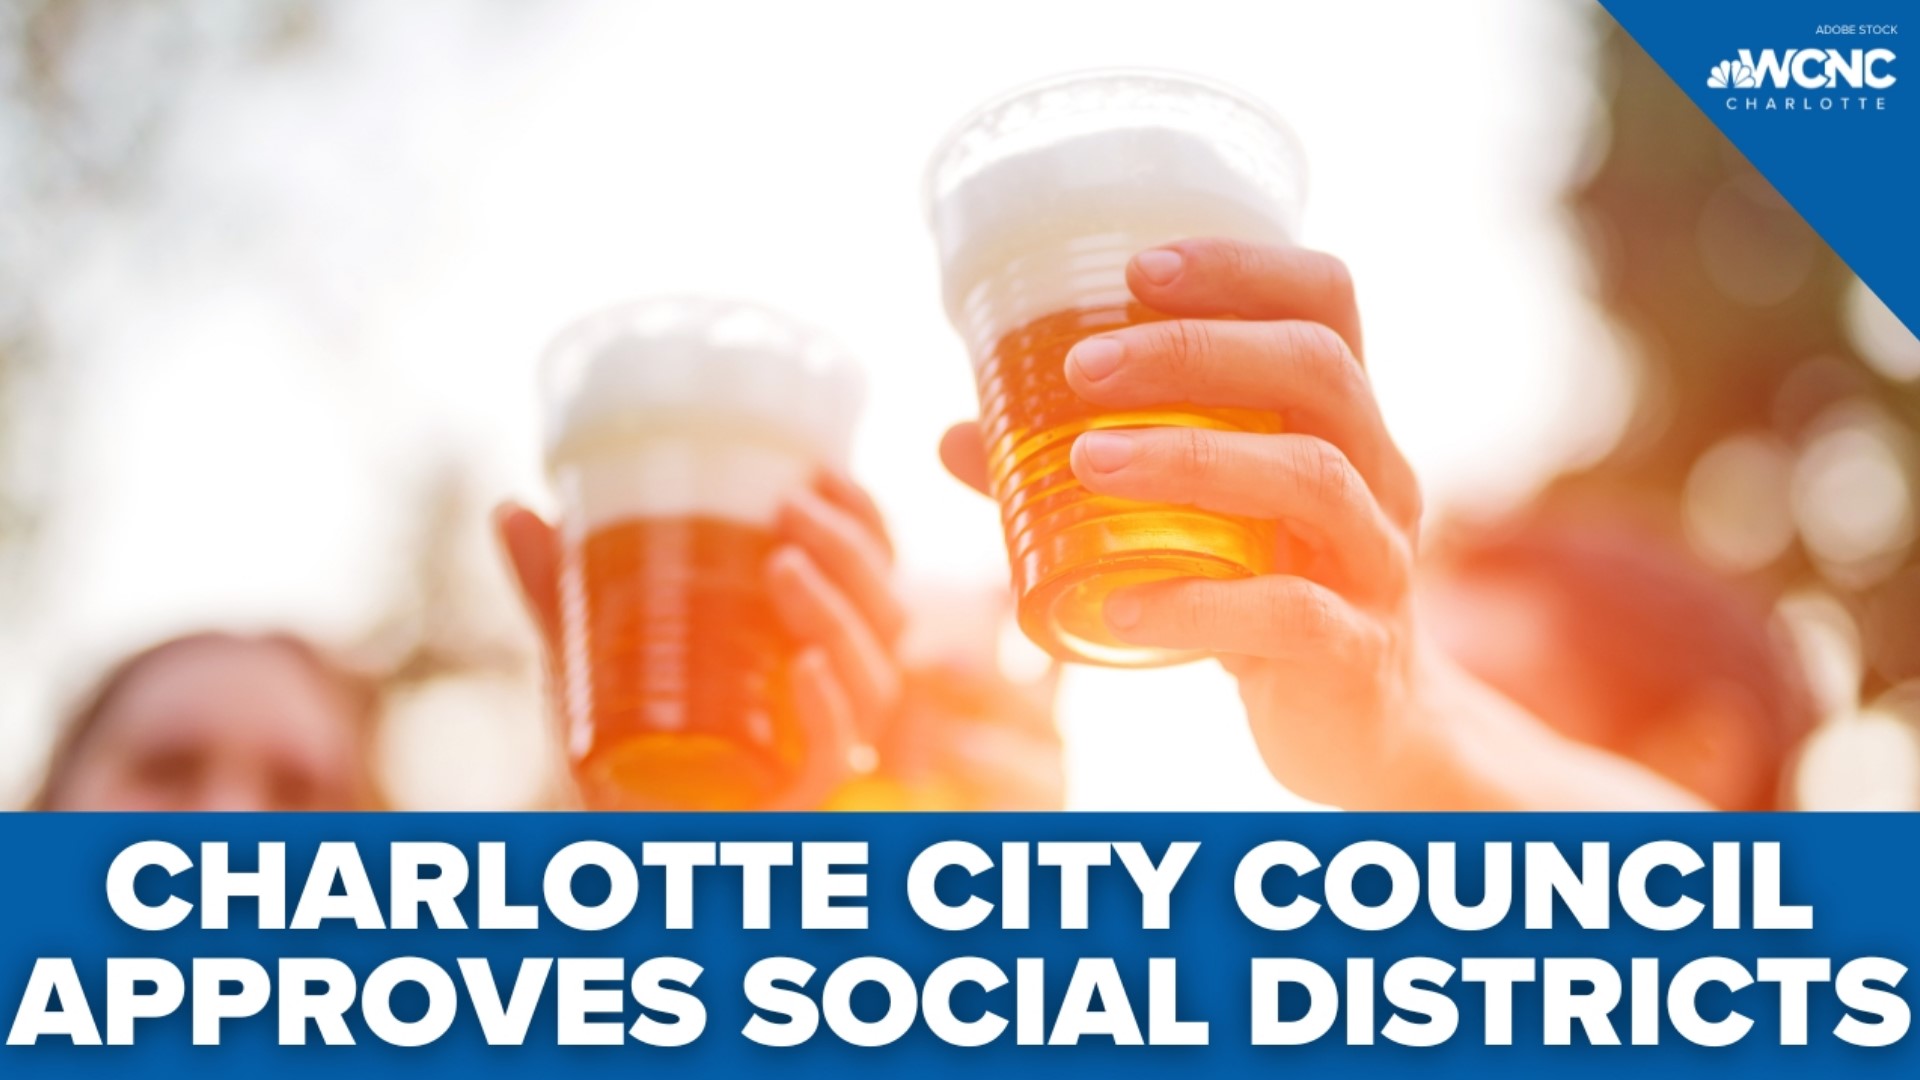 During Monday's meeting, Charlotte City Council voted unanimously to allow the establishment of social districts.